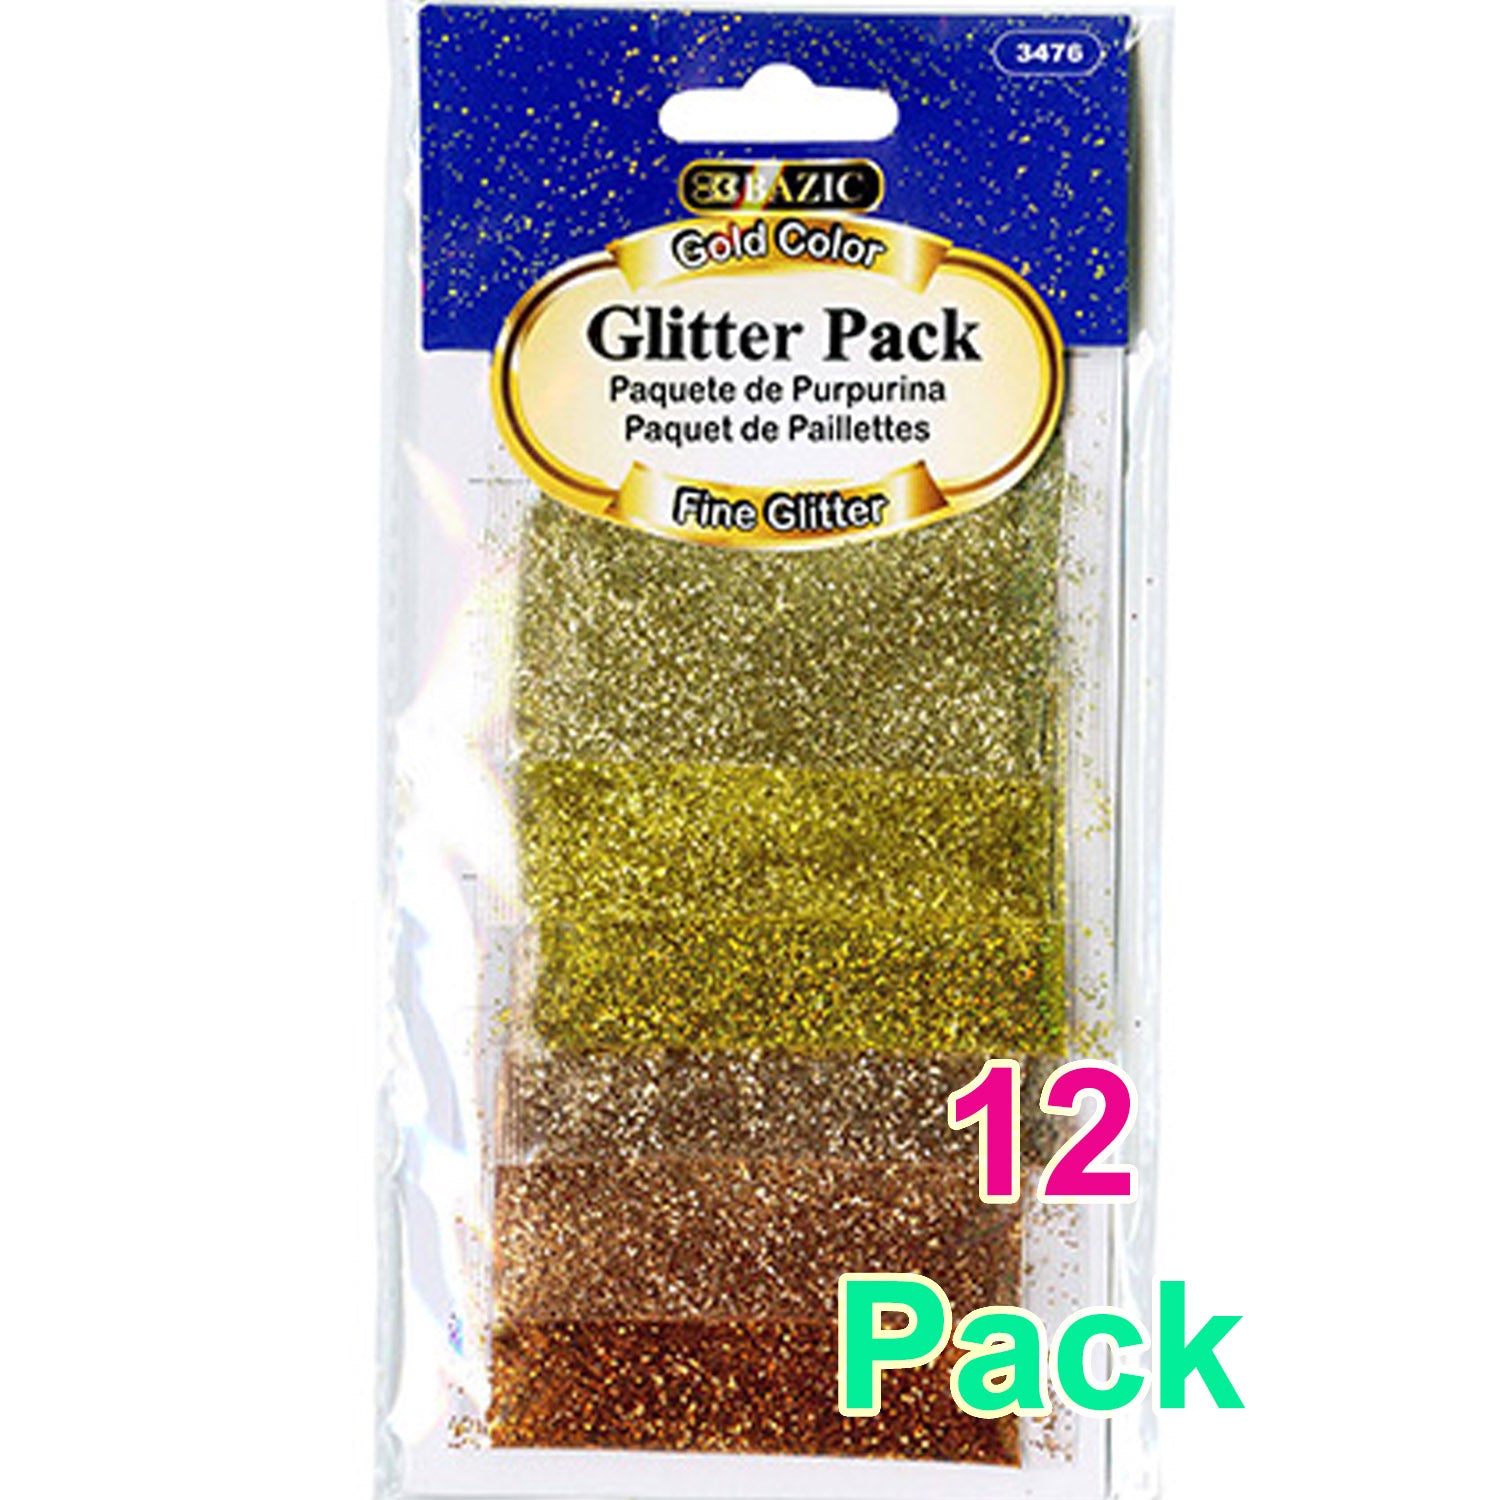 Gold Color Glitter Pack for your Art | 0.07 oz (2g)